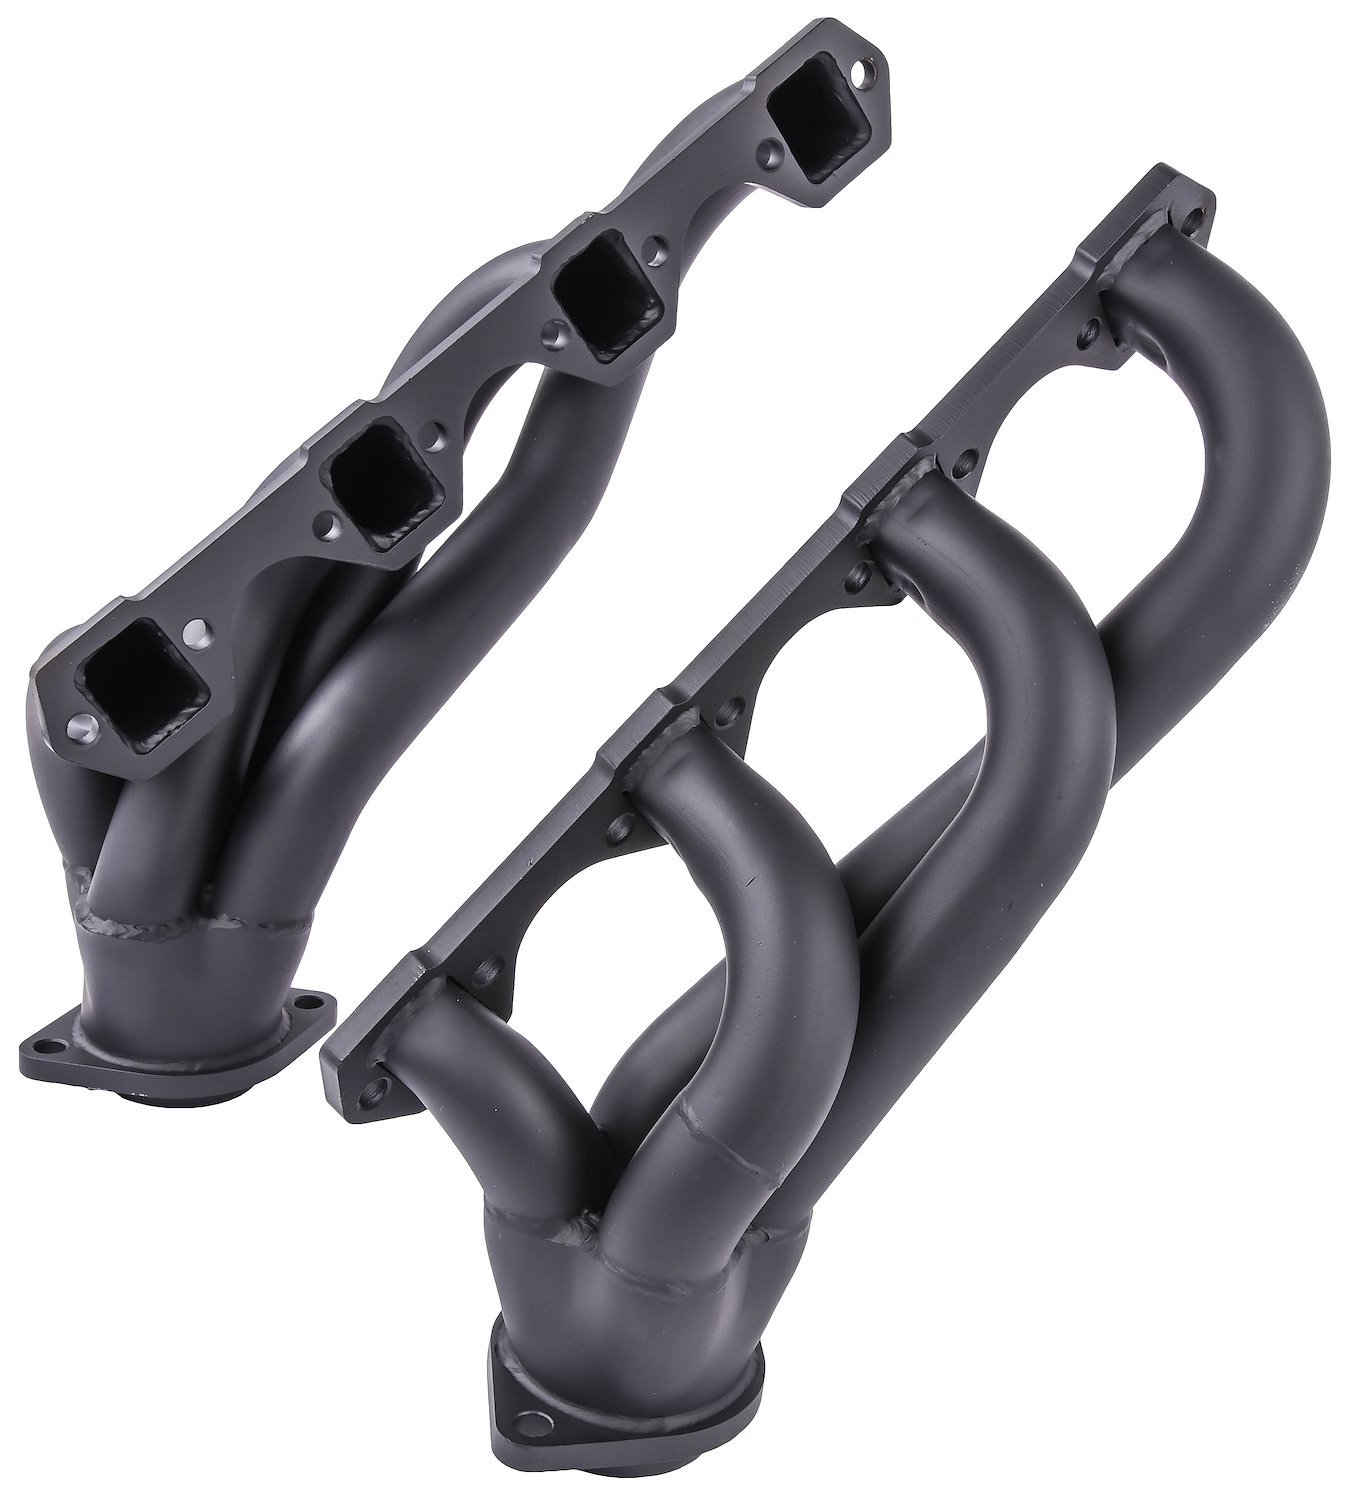 Painted Black Shorty Headers for Small Block Ford Mustang, Cougar, Falcon, and more